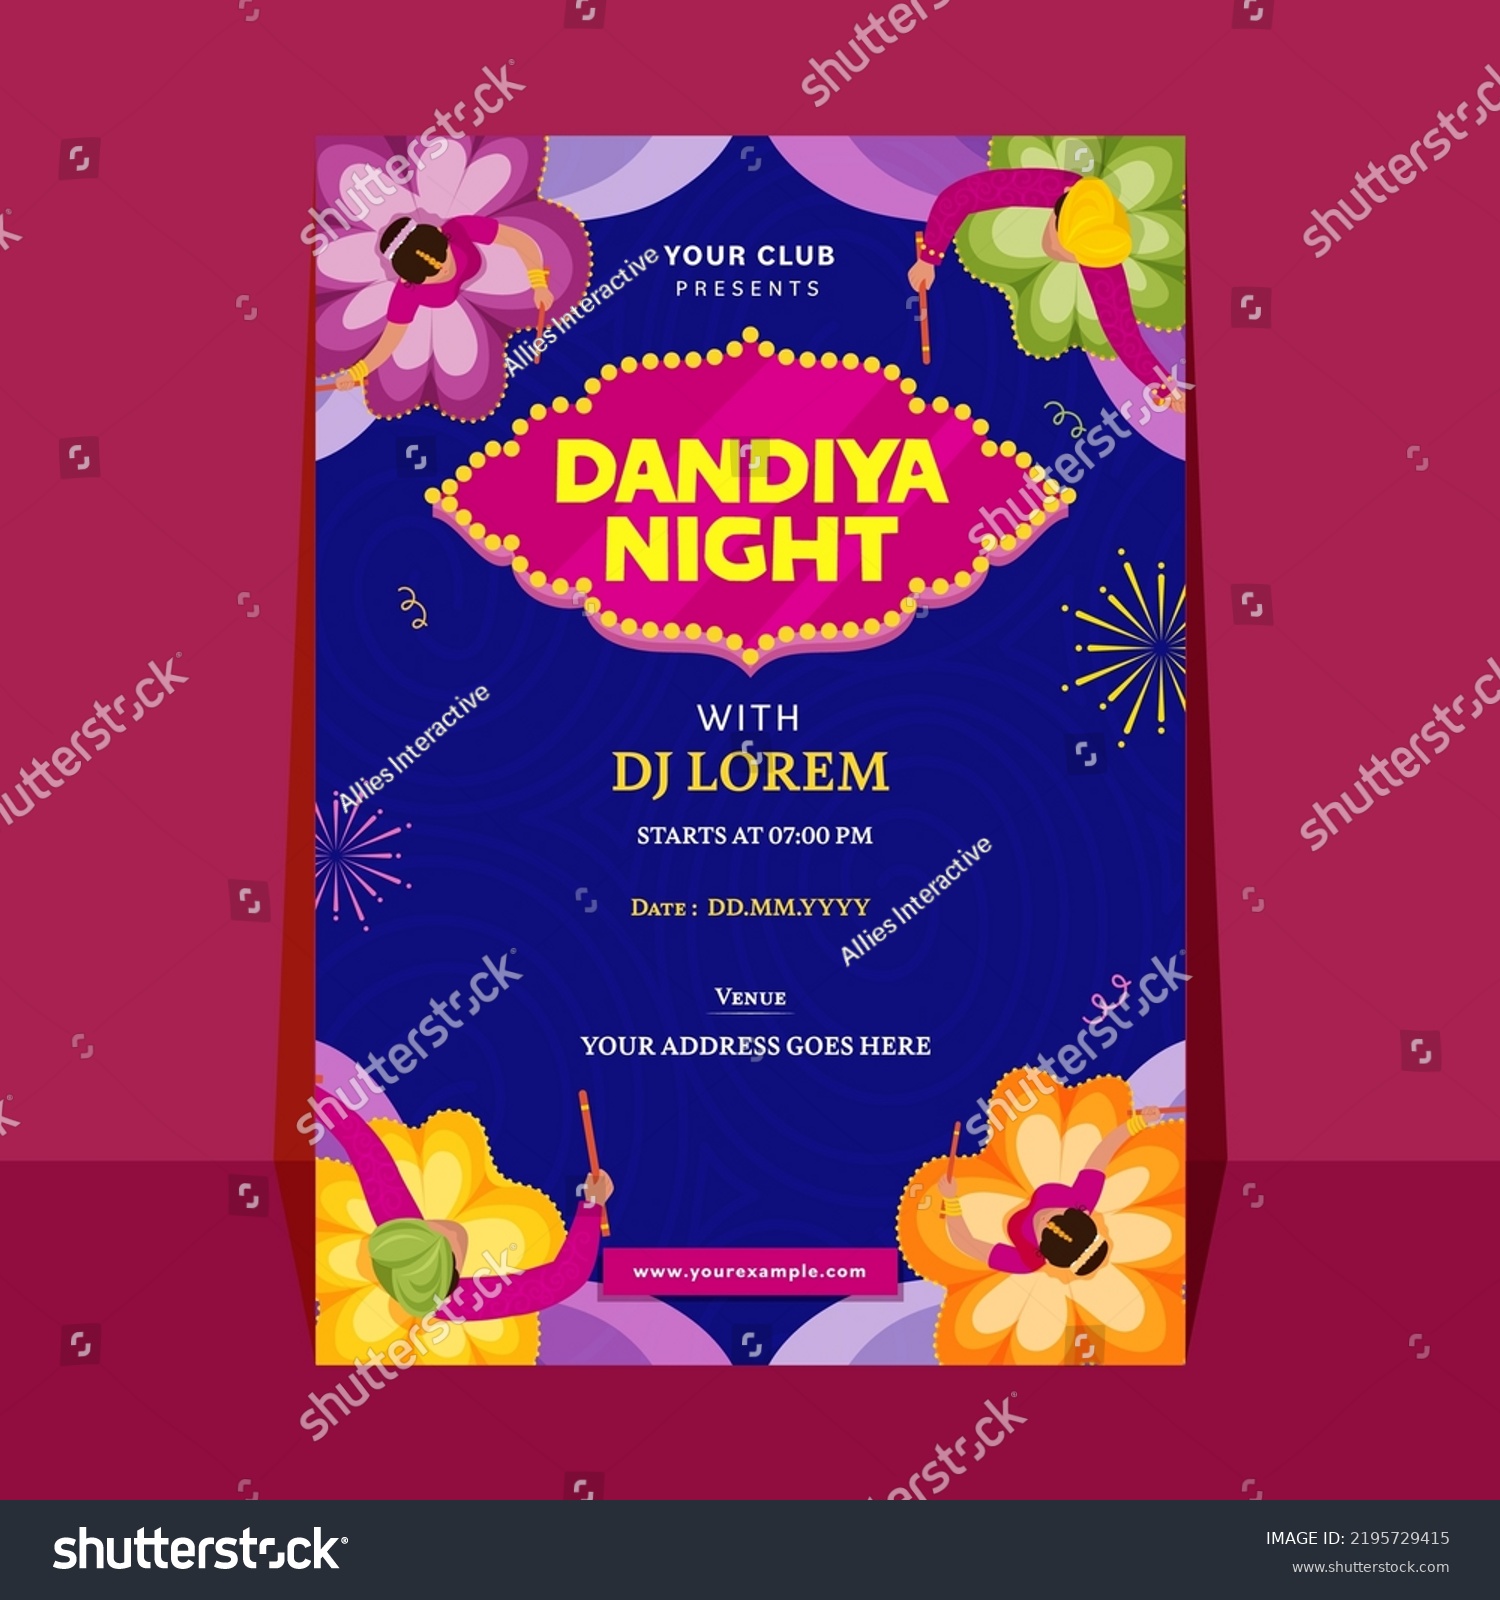 SVG of Dandiya Night Party Invitation Card With Top View Of Indian Young Couple Dancing And Event Details. svg